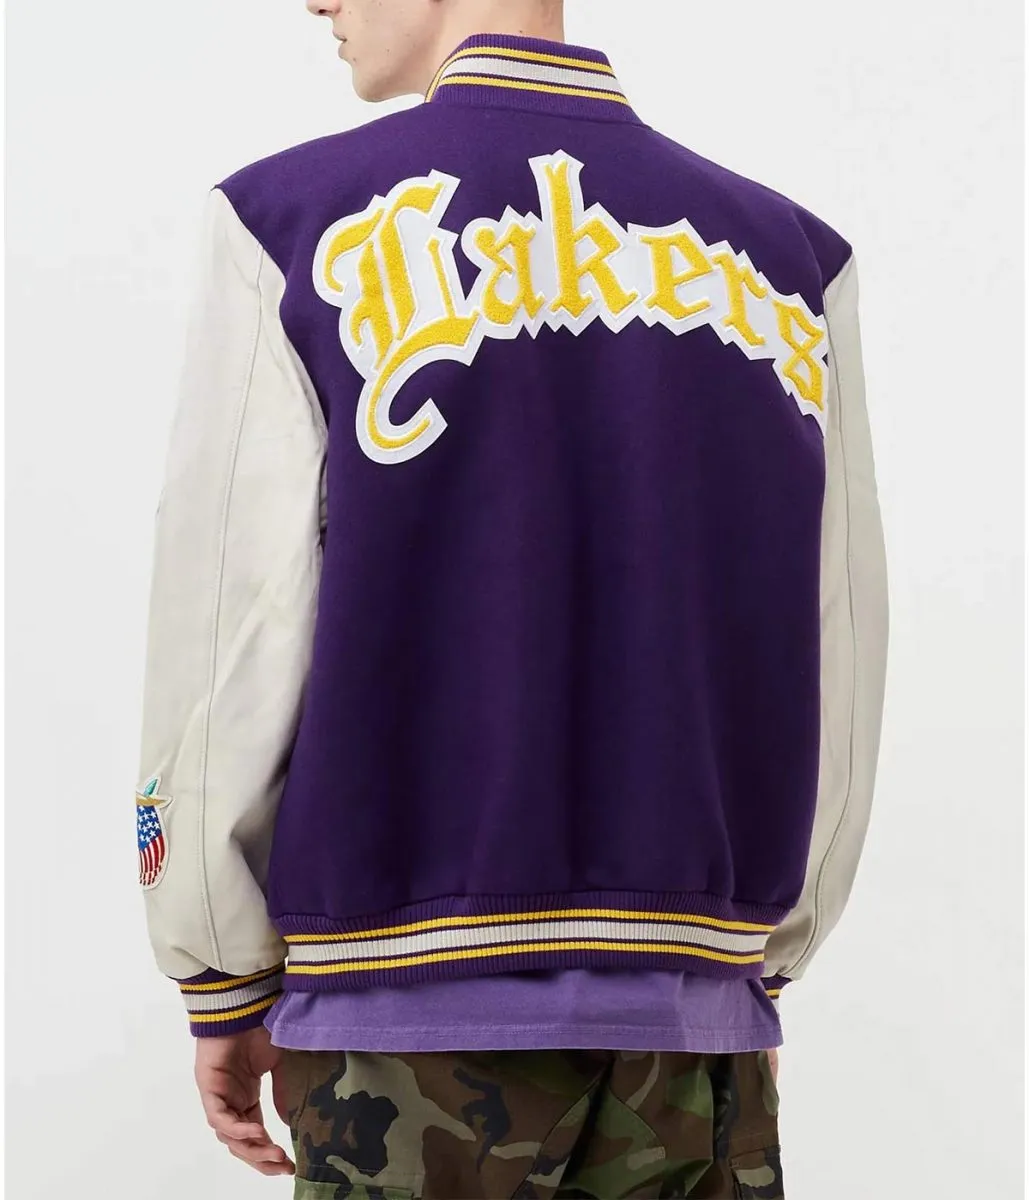 LA Lakers Letterman Purple Wool and White Leather Jackets